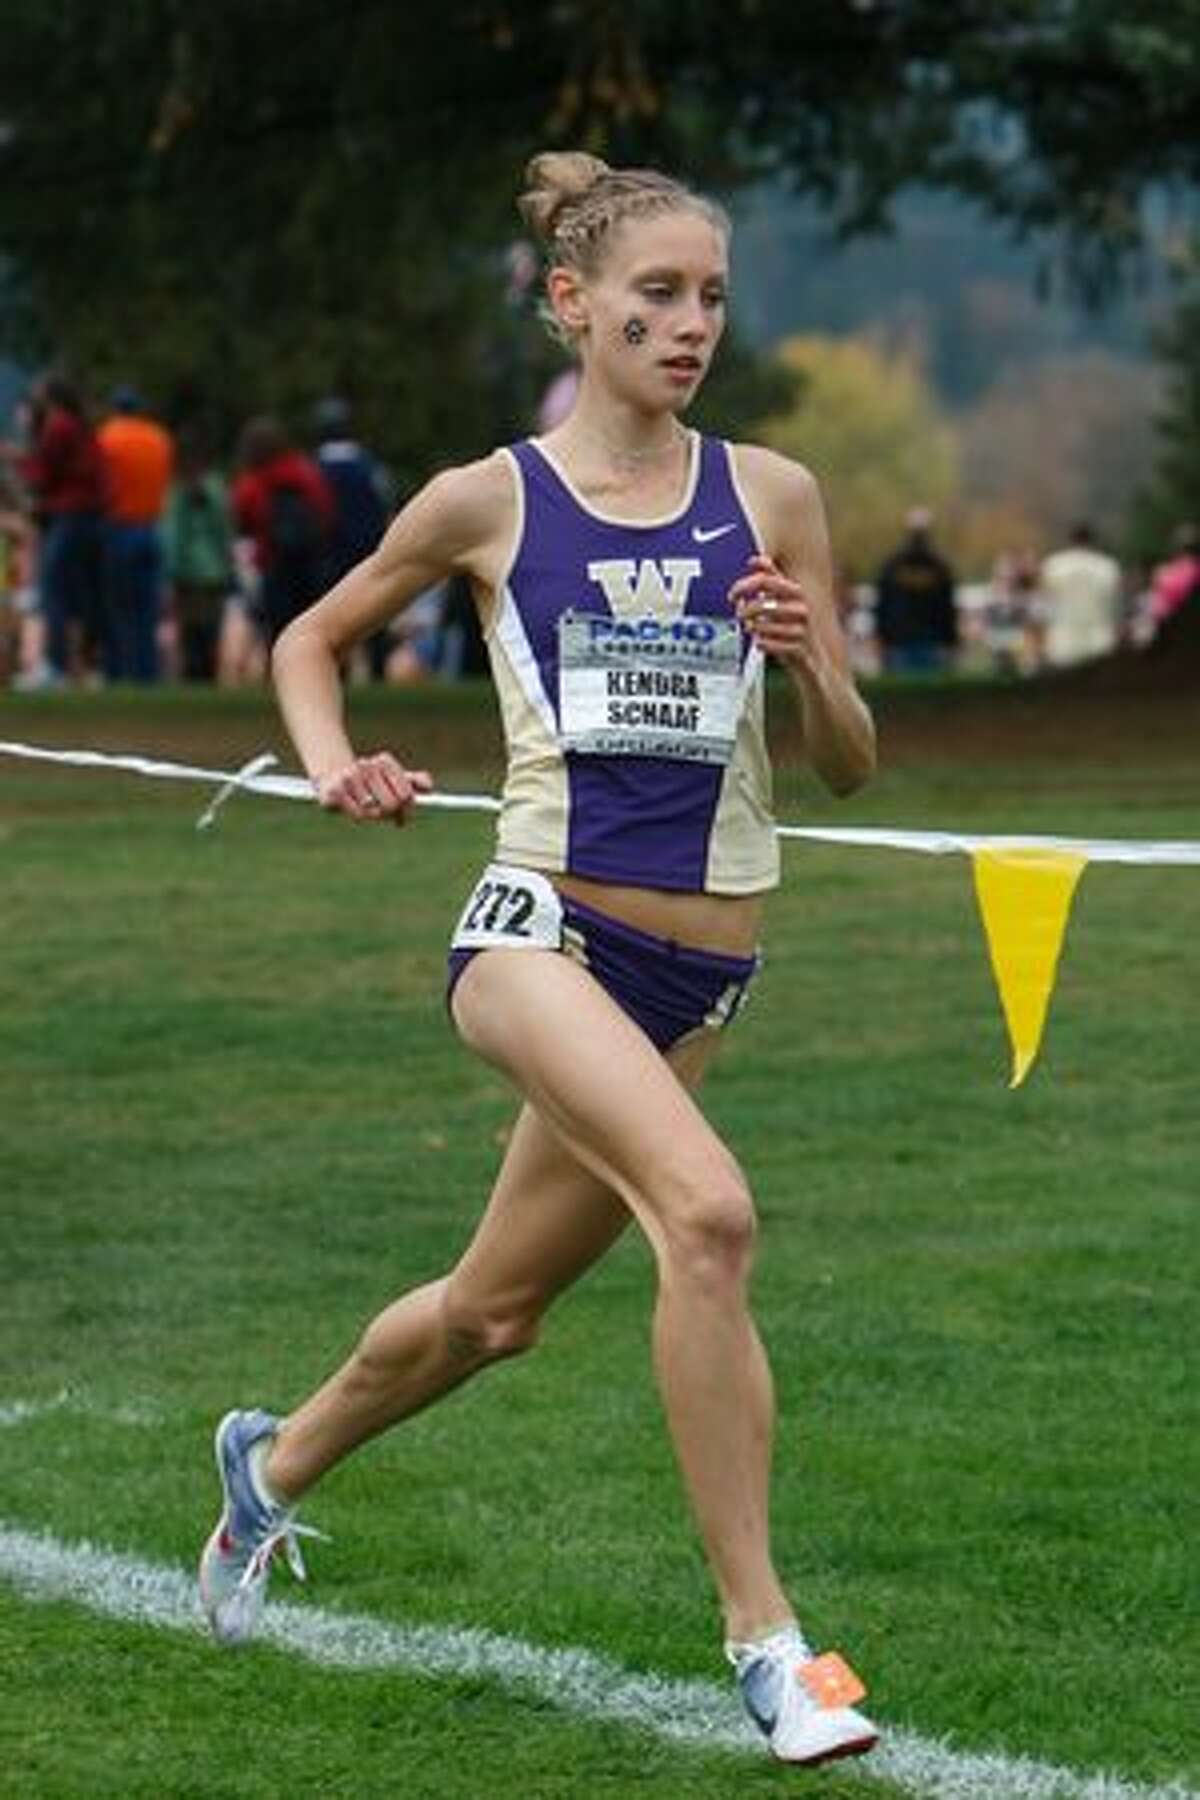 Kendra Schaaf running at the 2008 Pac 10 x country championships